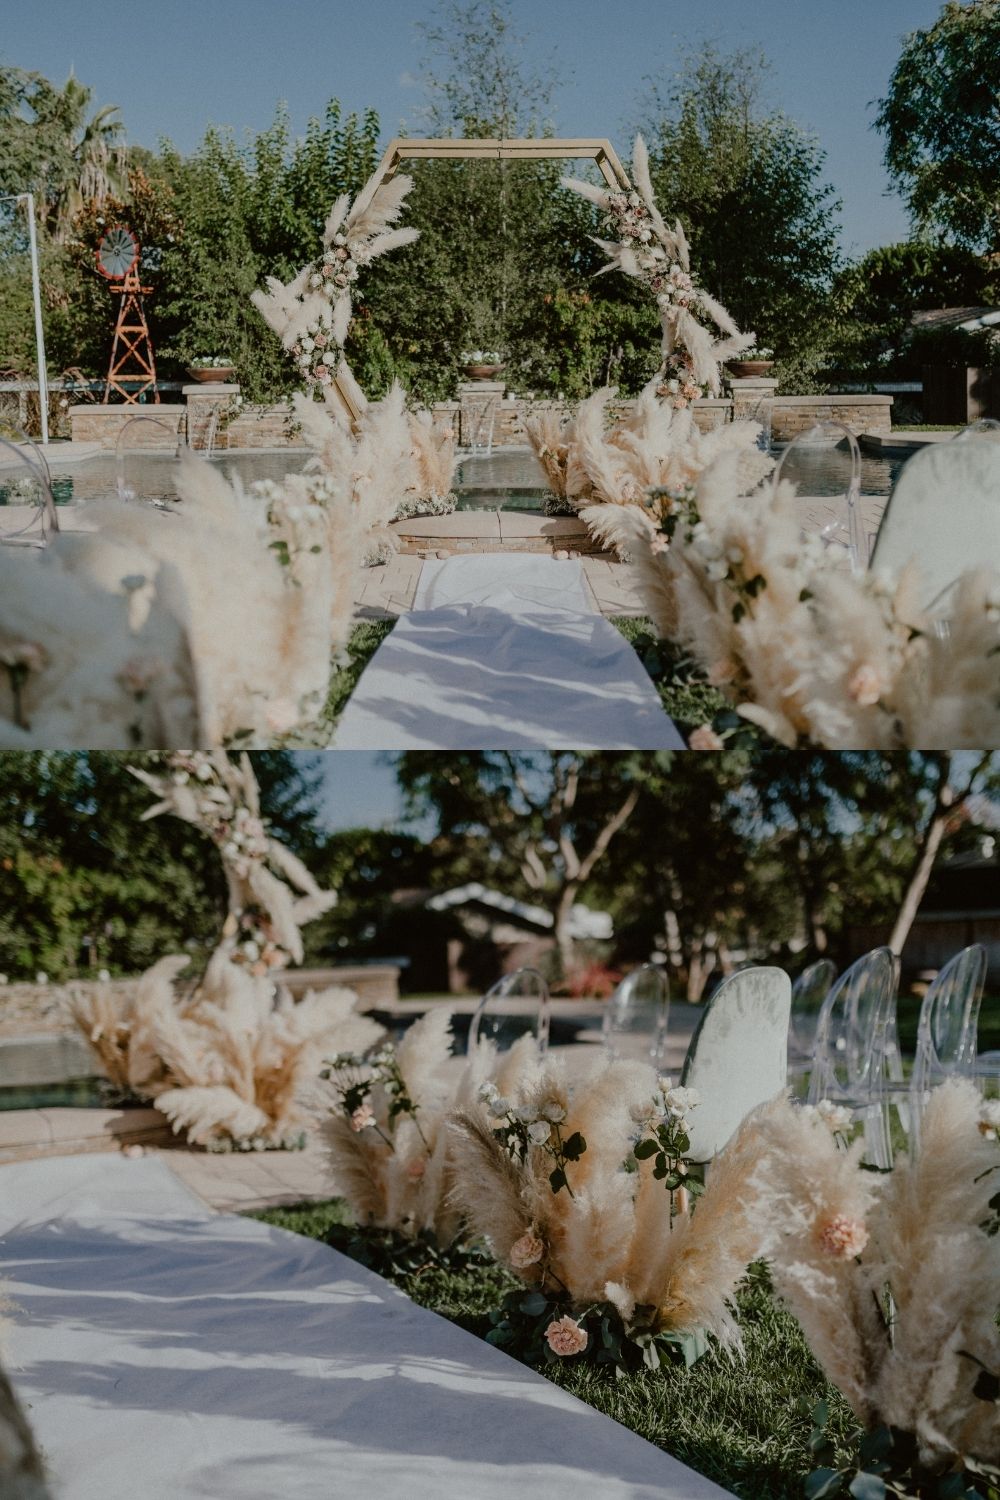 Romantic bohemian moody wedding decor for ceremony with translucent reception chairs and pampas grass lining the rows, wedding ceremony inspiration, bohemian wedding reception ideas | San Diego Wedding Photographer, San Diego California Elopement Photographer, Destination Wedding Photographer, Destination Elopement Photographer, Newlywed moments ideas, Newlywed Photography inspiration, California Elopement ideas, San Diego Wedding Inspiration, Romantic Boho Wedding Ideas, Romantic Elopement Inspiration, Bohemian Wedding Ideas | chelseaabril.com